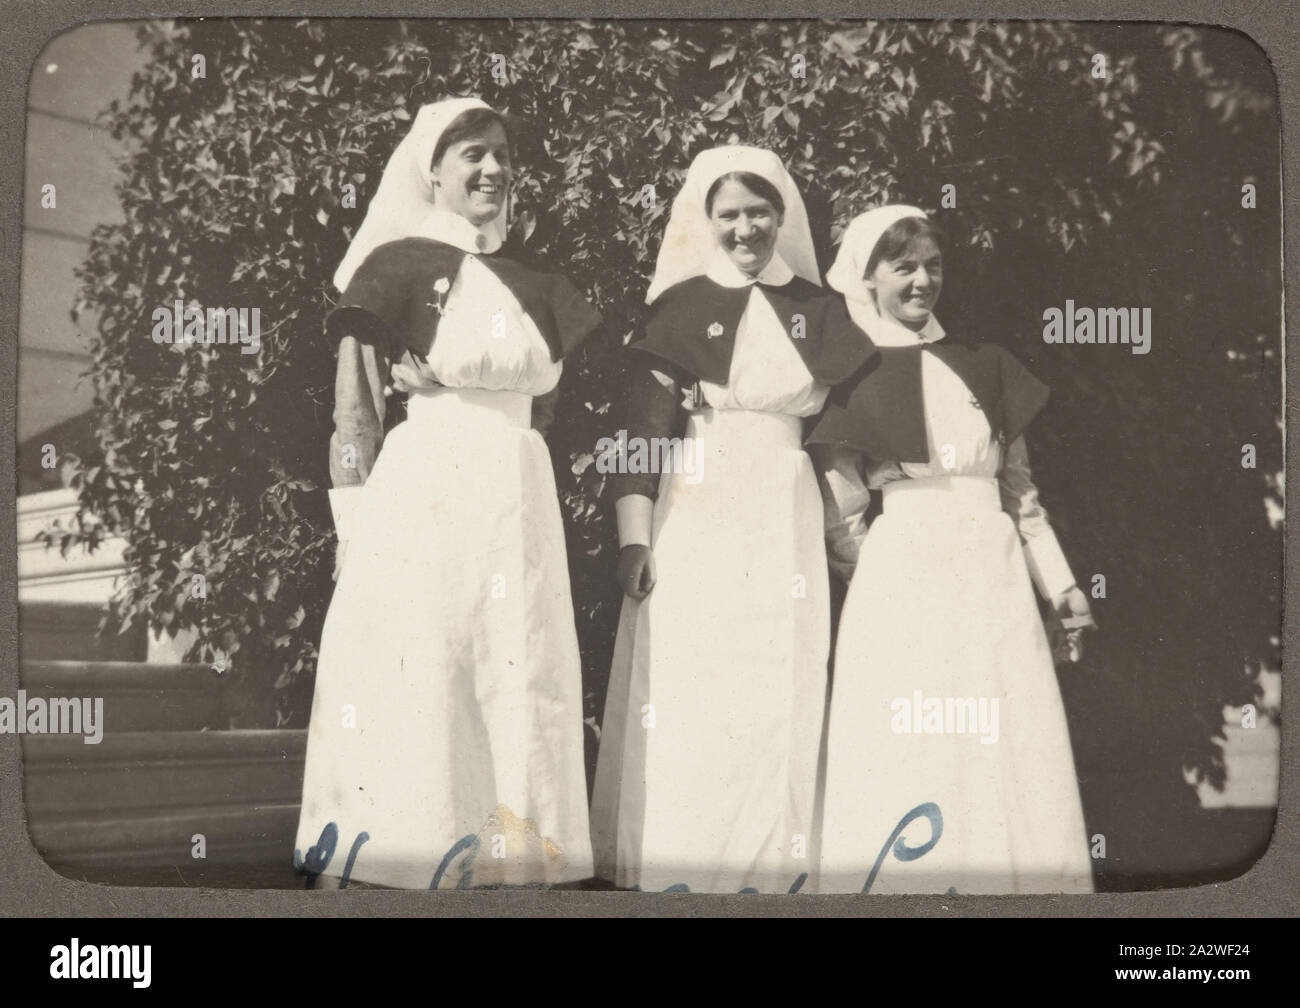 Digital Image - World War I, Three Nurses, Egypt, 1915-1917, Digital image  of a photograph from an album compiled by Sister Selina Lily (Lil)  Mackenzie, documenting life as an Australian nurse during